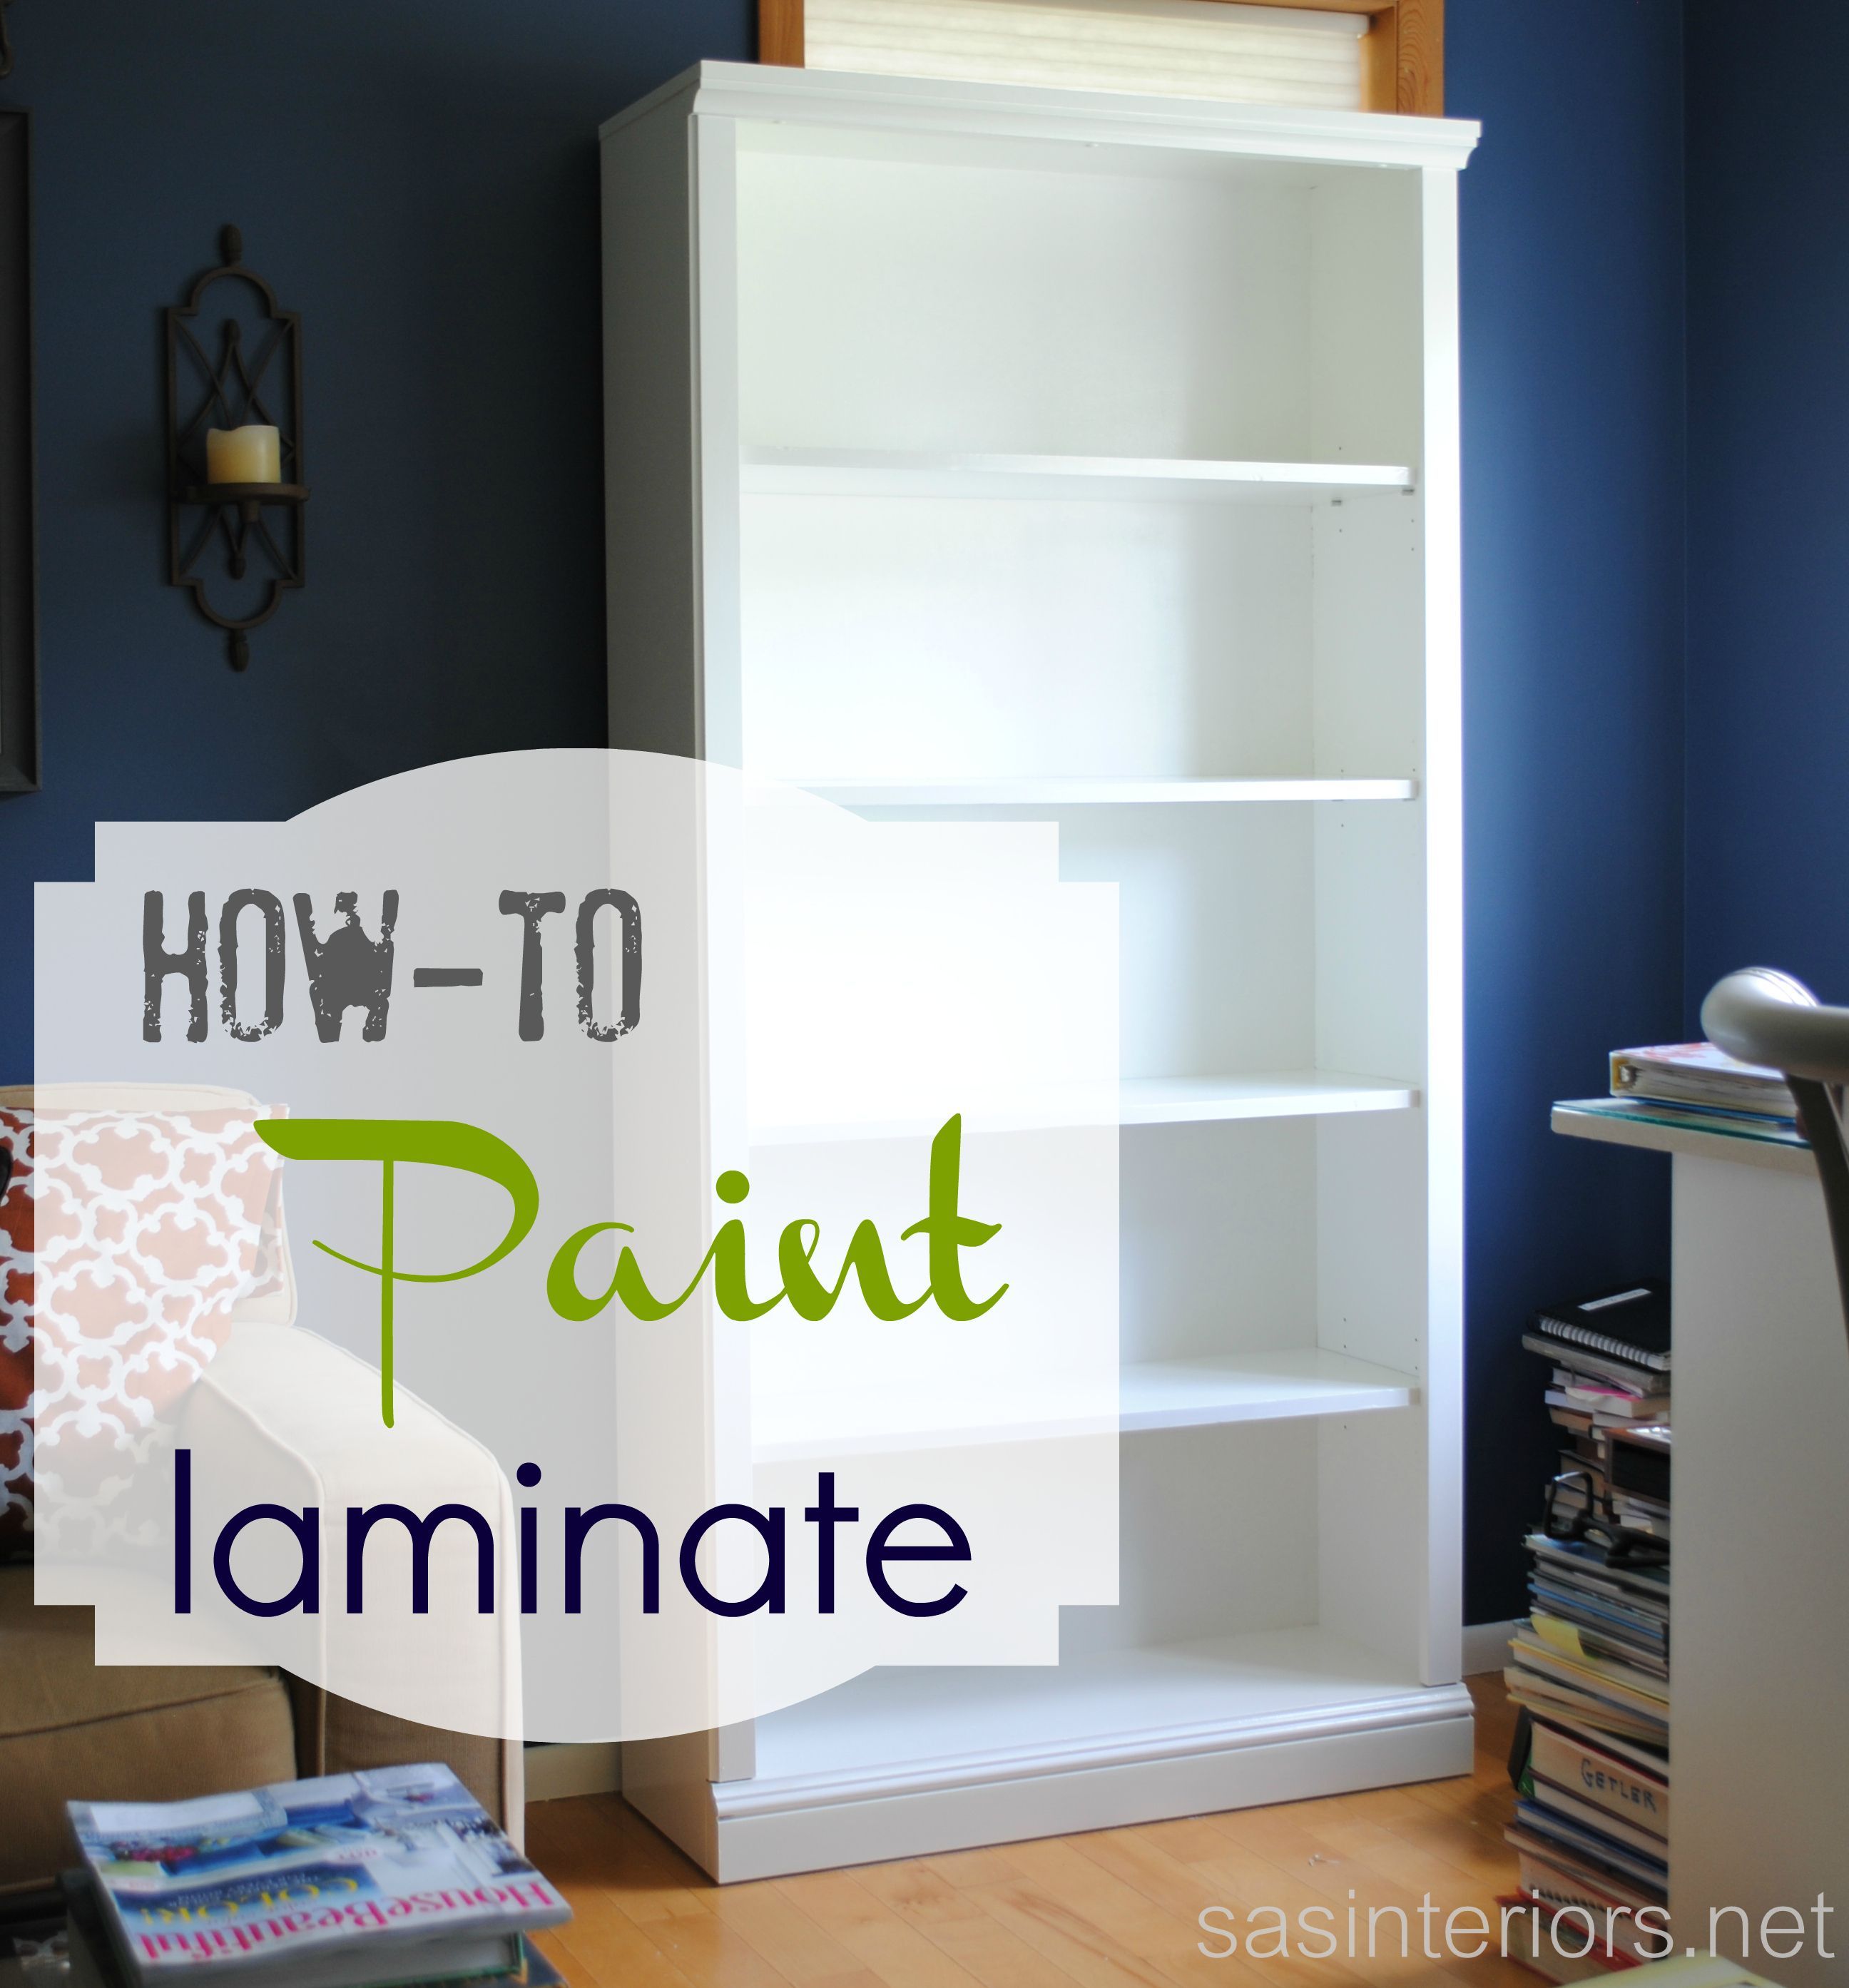 Tutorial on How-To Paint Laminate Furniture + How-To Fix Bowed Shelves by @Jenna